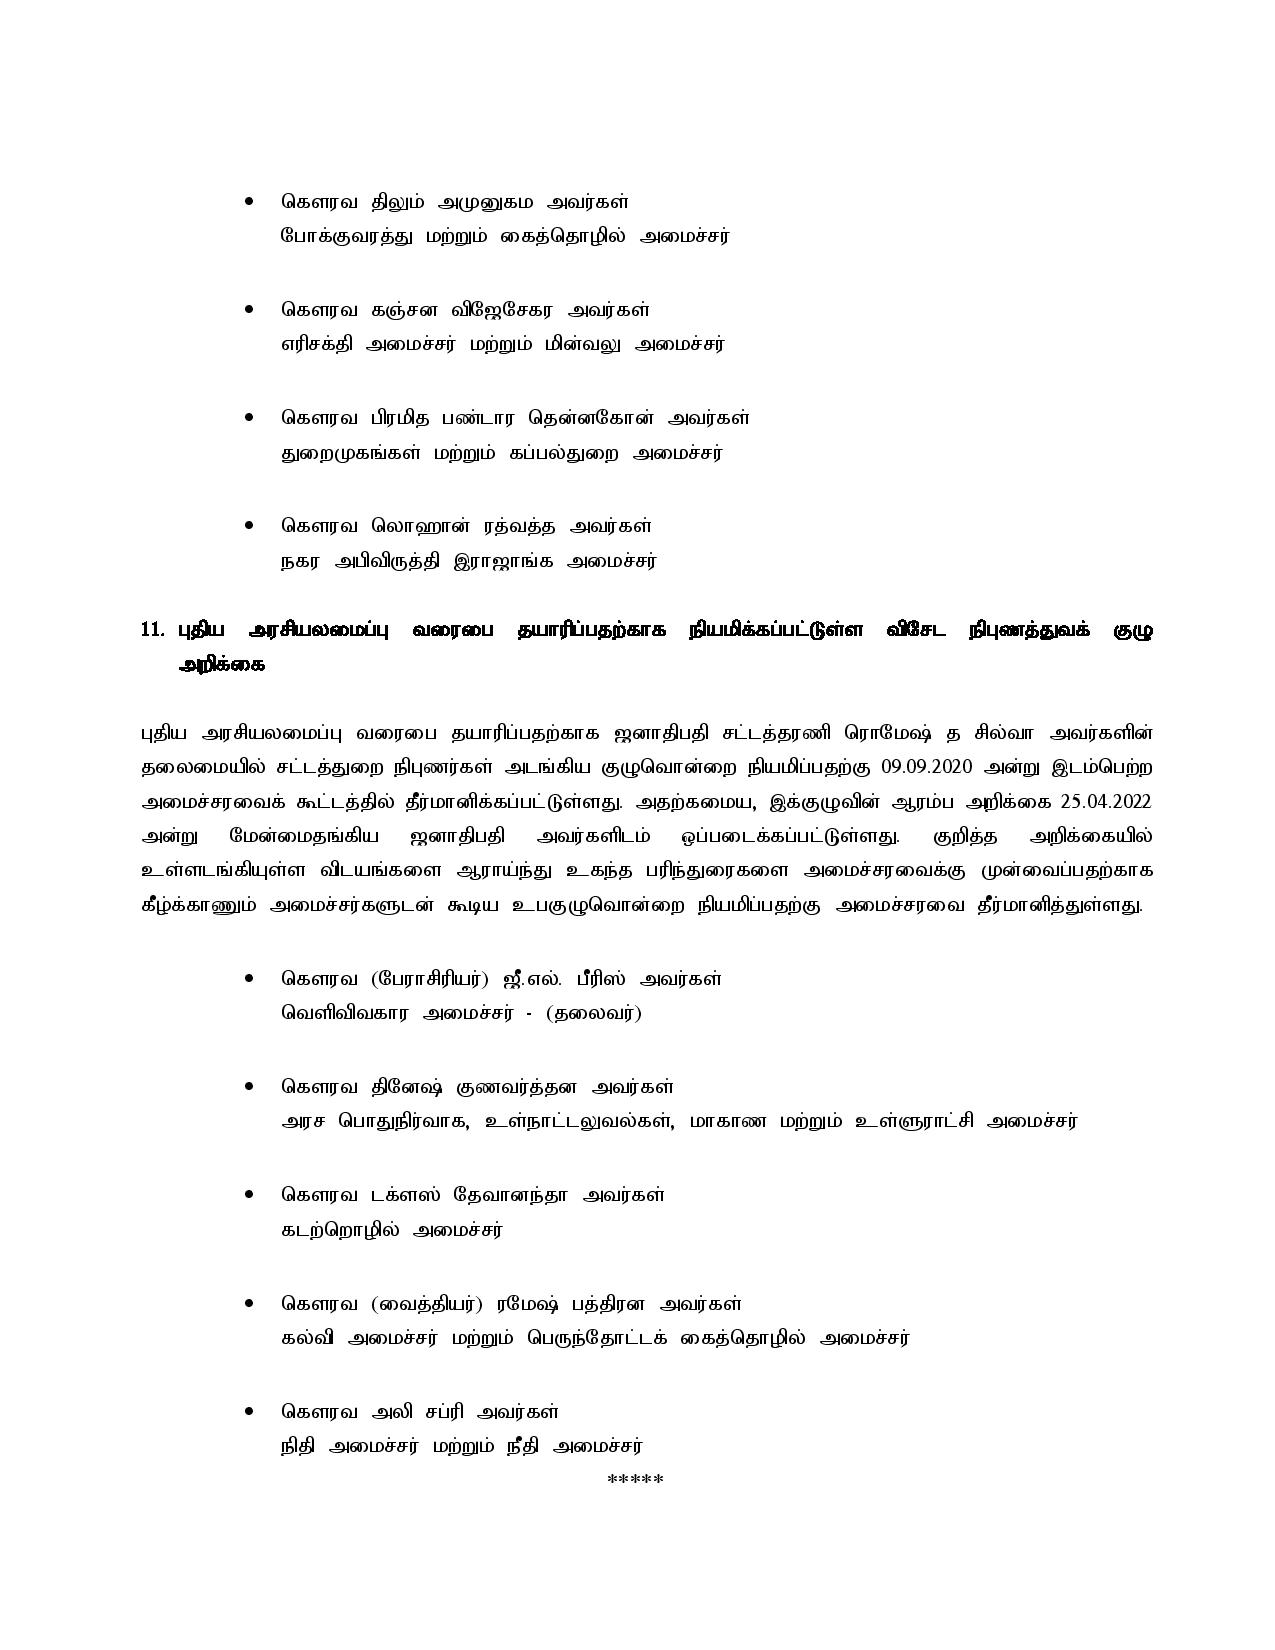 Cabinet Decisions on 02.05.2022 Tamil page 004